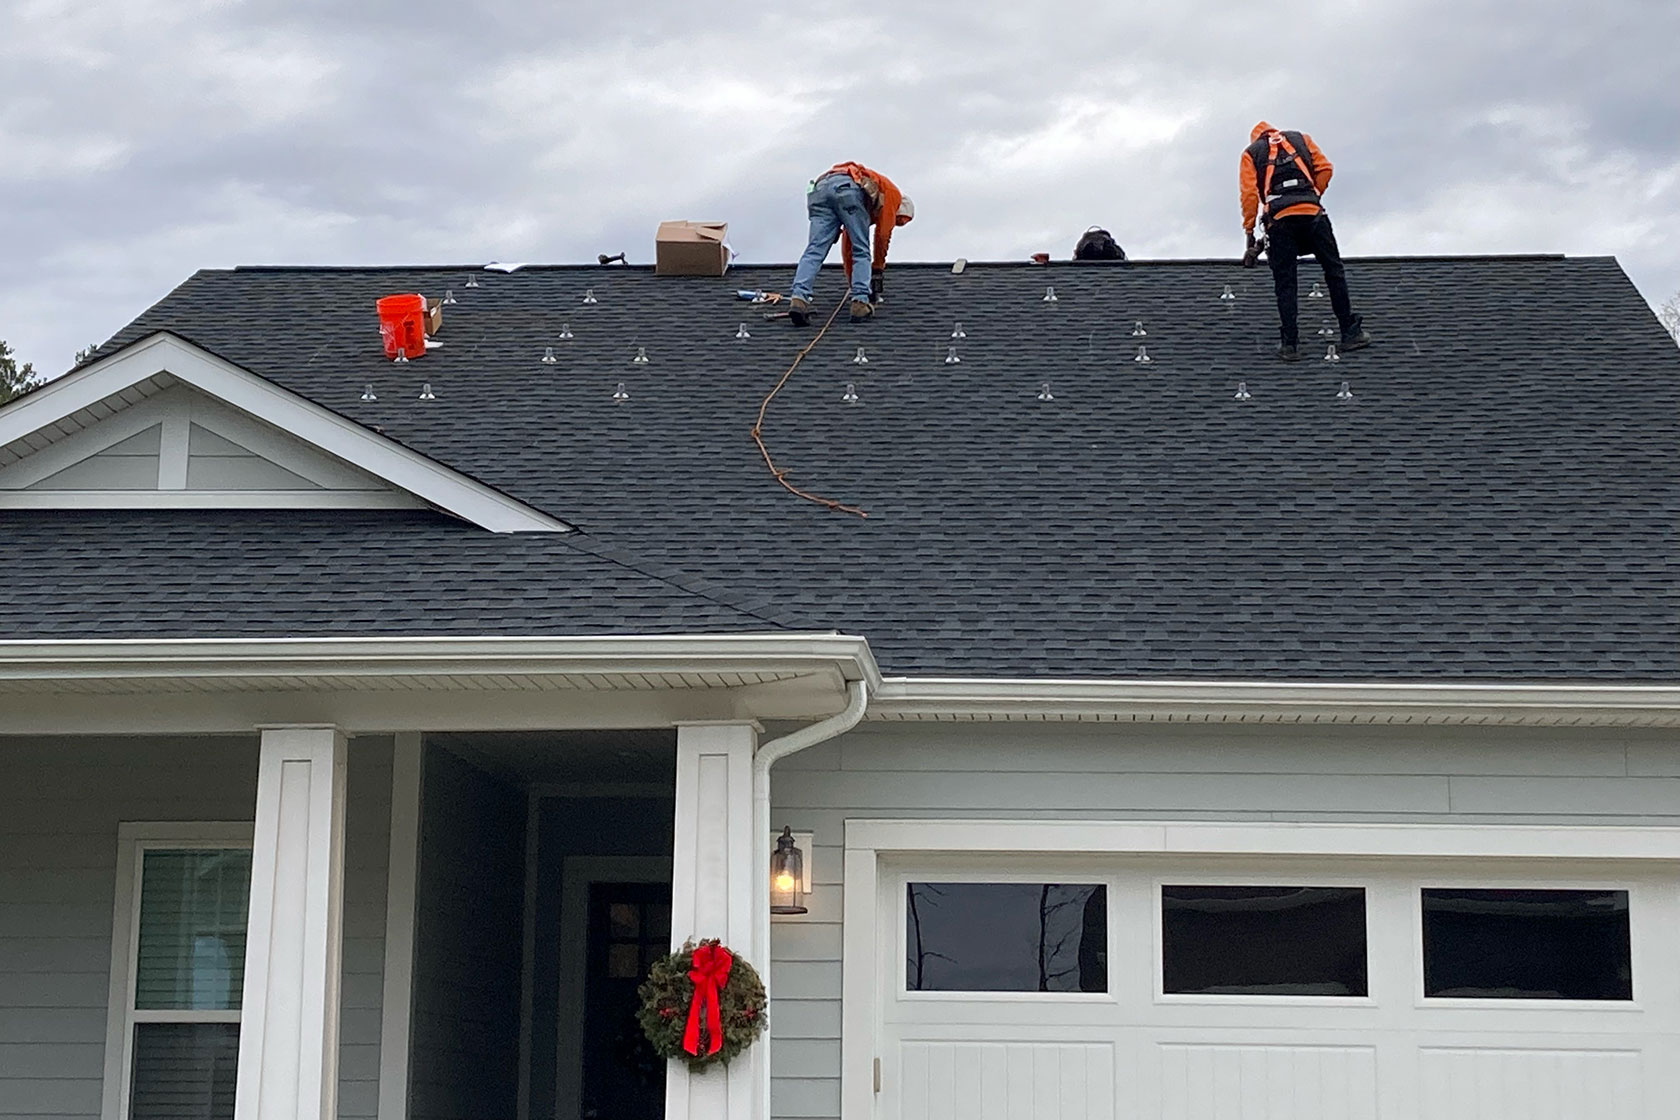 Photo shows workers on a roof of a light grey hours against a cloudy sky